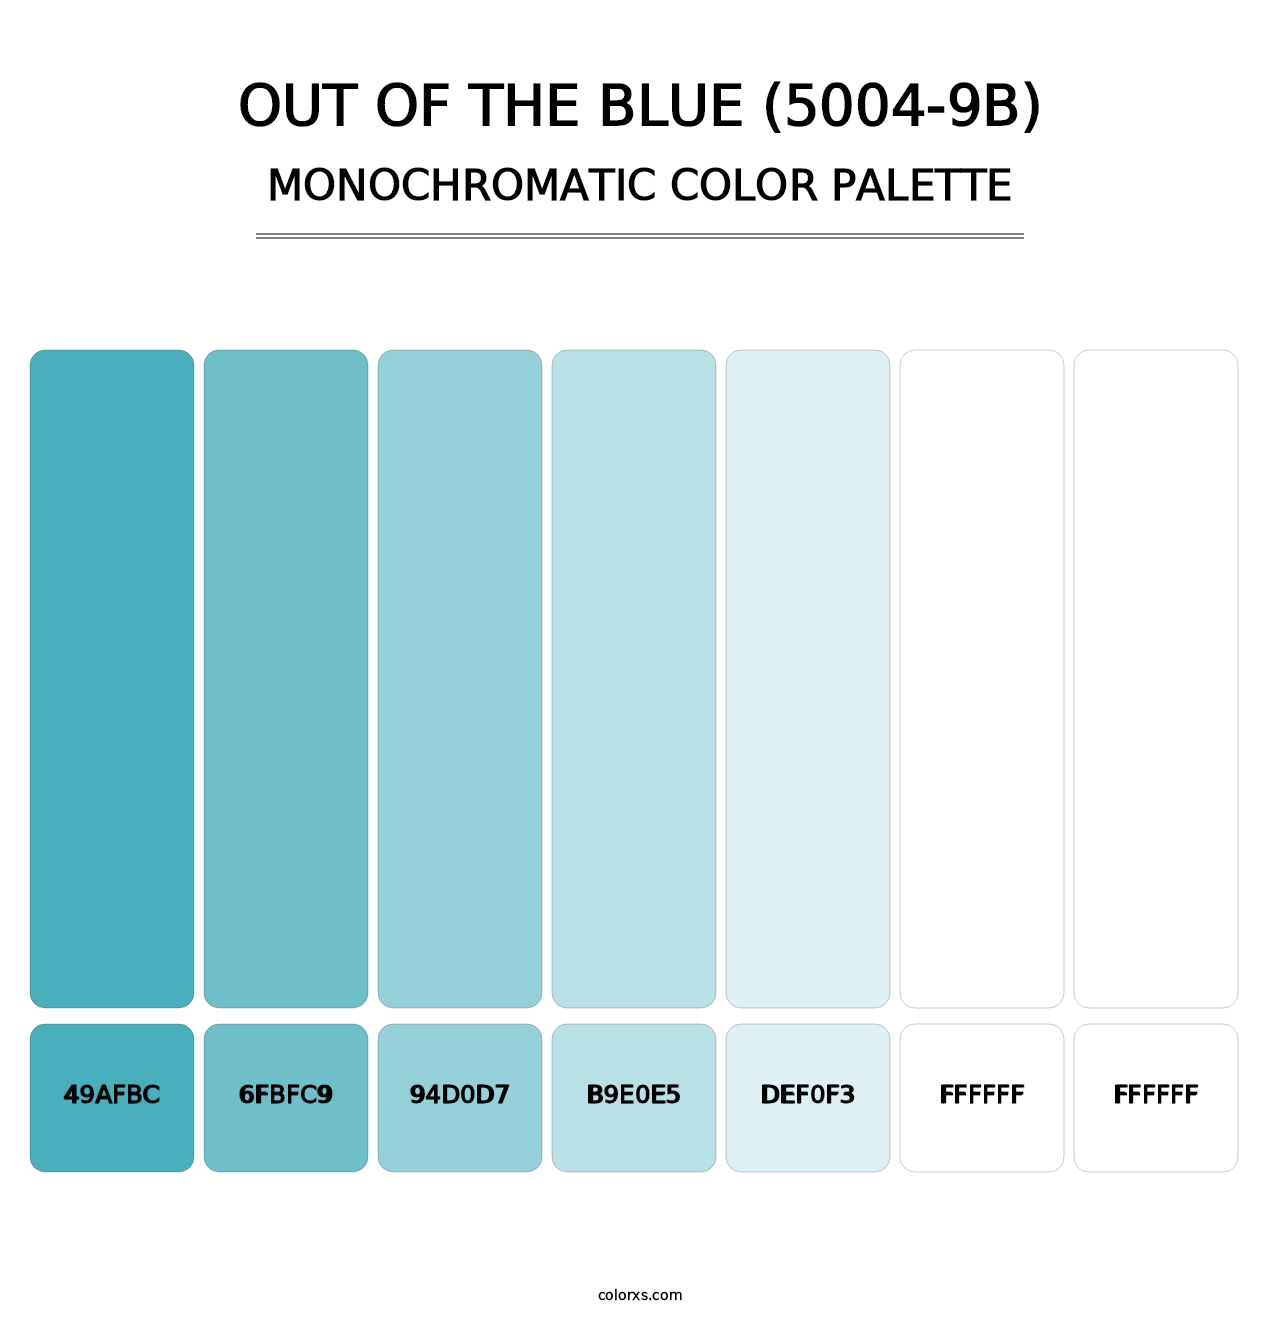 Out of the Blue (5004-9B) - Monochromatic Color Palette